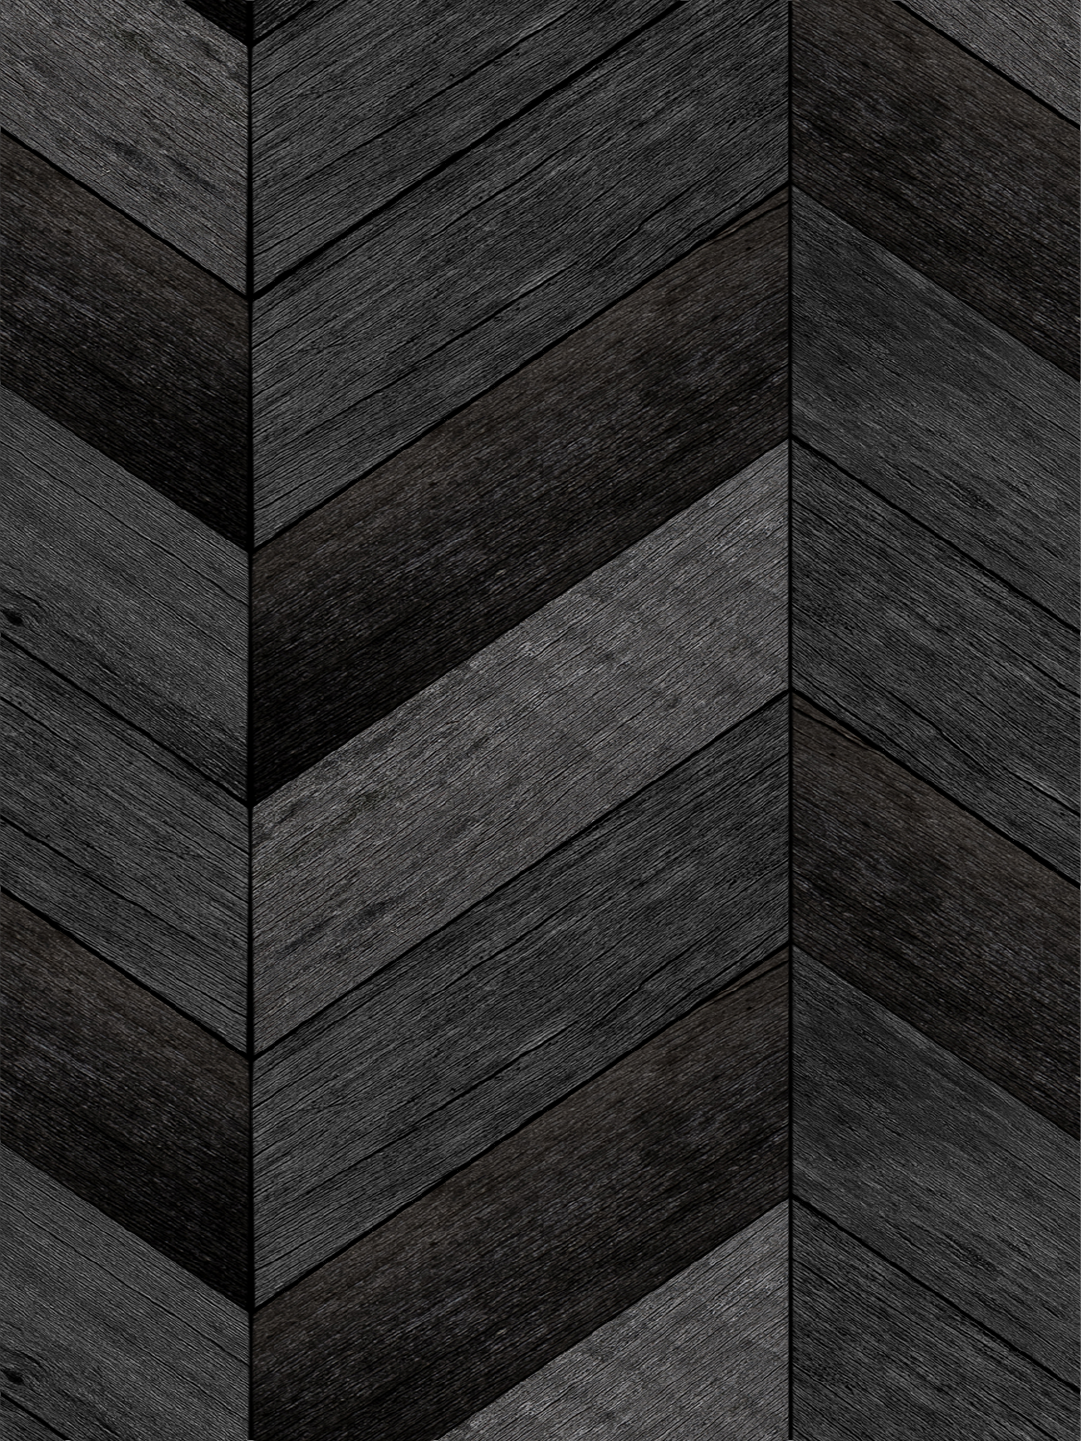  Large Black wood tile herringbone easy to install and remove peel and stick custom wallpaper available in different lengths/sizes locally created and printed in Canada. Removable, washable, durable, commercial grade, customizable and water proof.